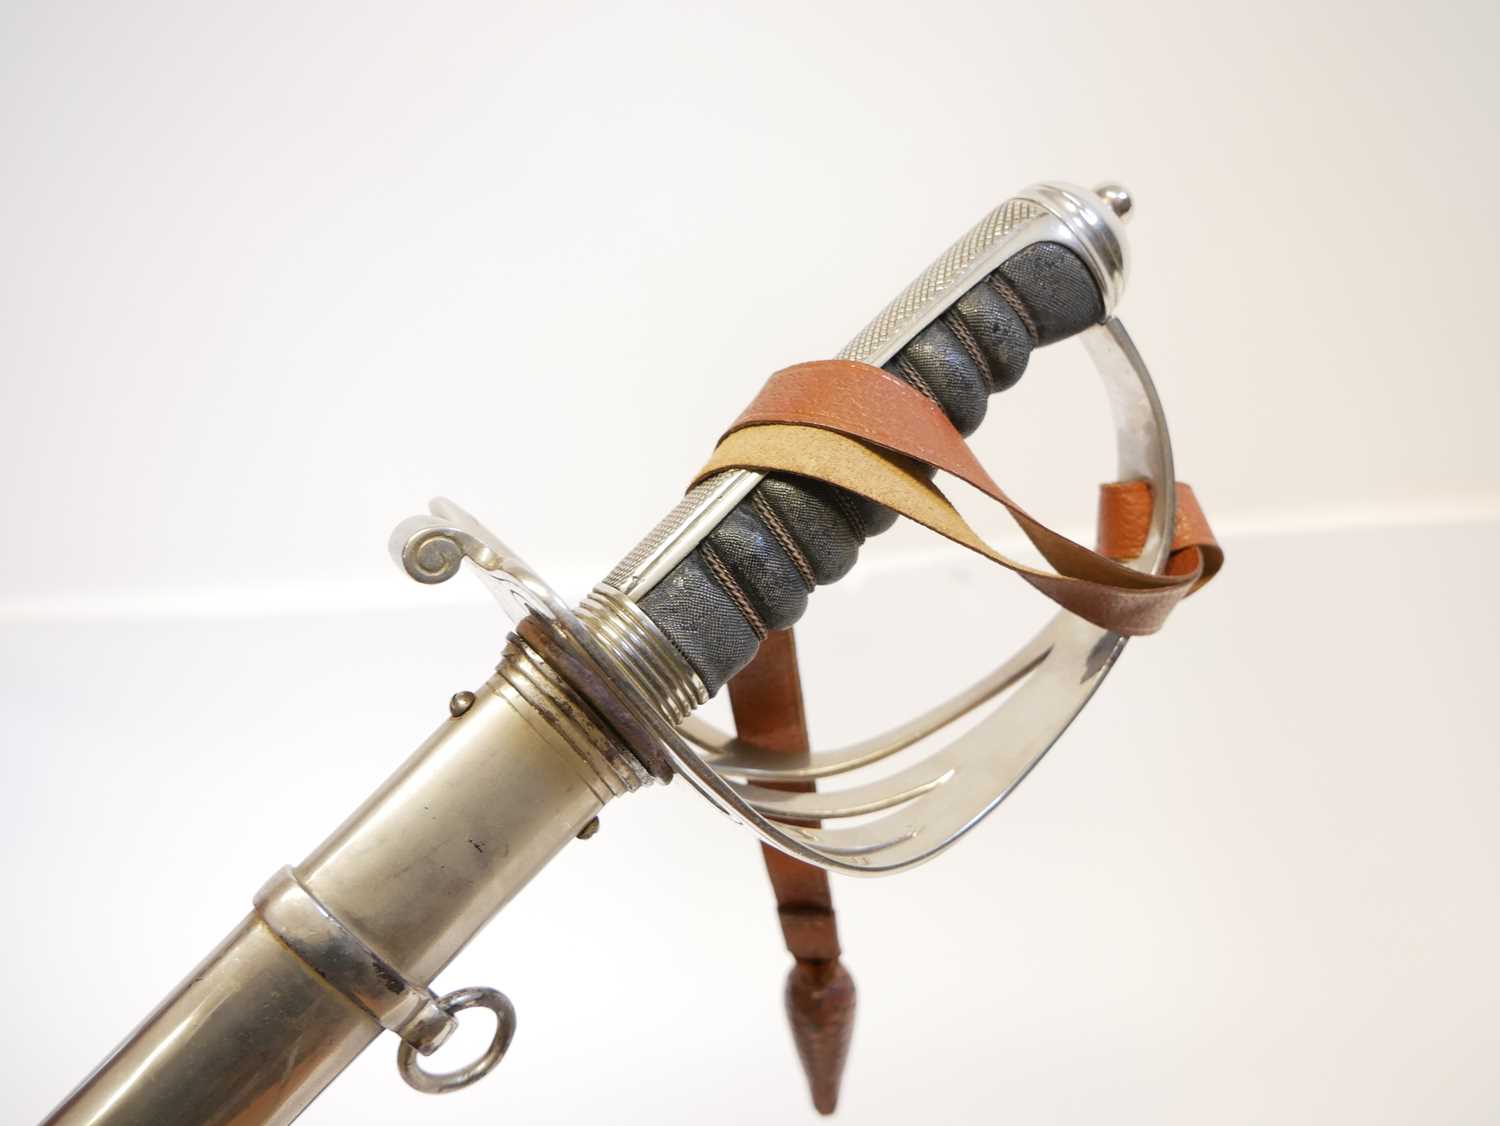 1827 pattern Rifle Officers sword and scabbard, retailed by Moss Brothers with 20-21 King Street, - Image 13 of 15